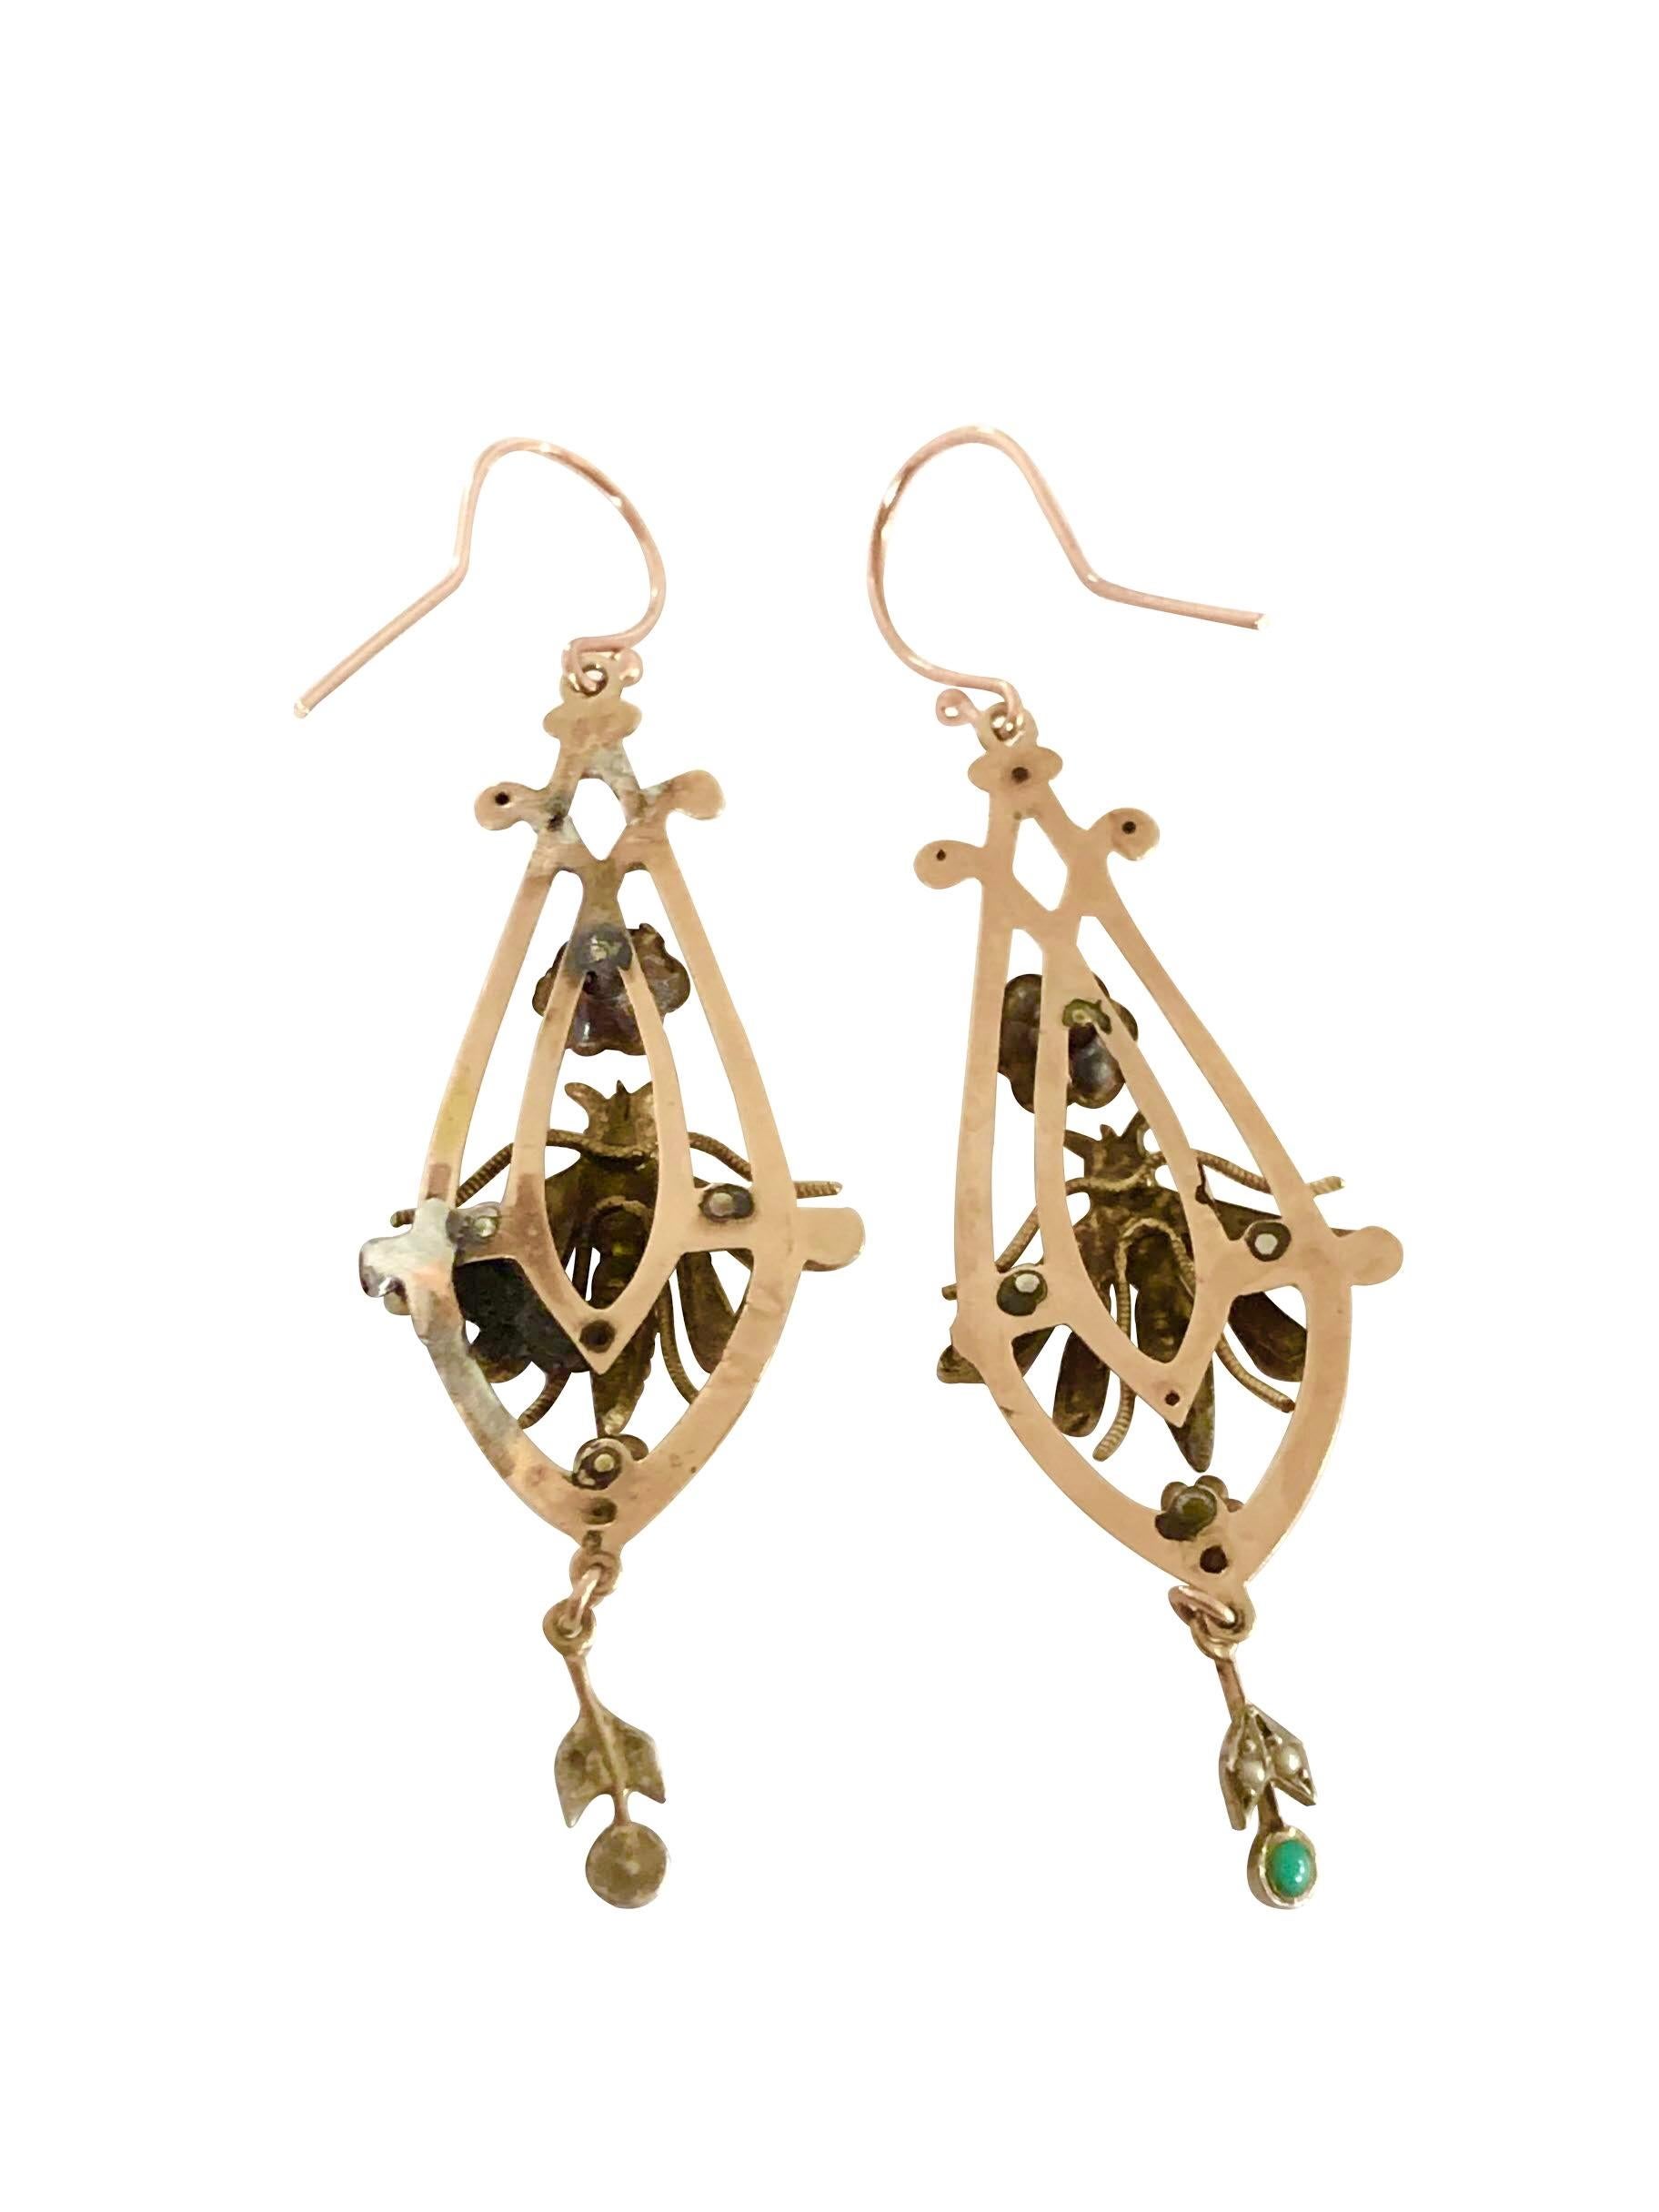 Circa 1880s Victorian Rose Gold Earrings, measuring 2 1/4 inches in length and 3/4 inch wide. having a silver winged Bug in the center with Ruby Eyes and Seed Pearls and Turquoise set throughout. 